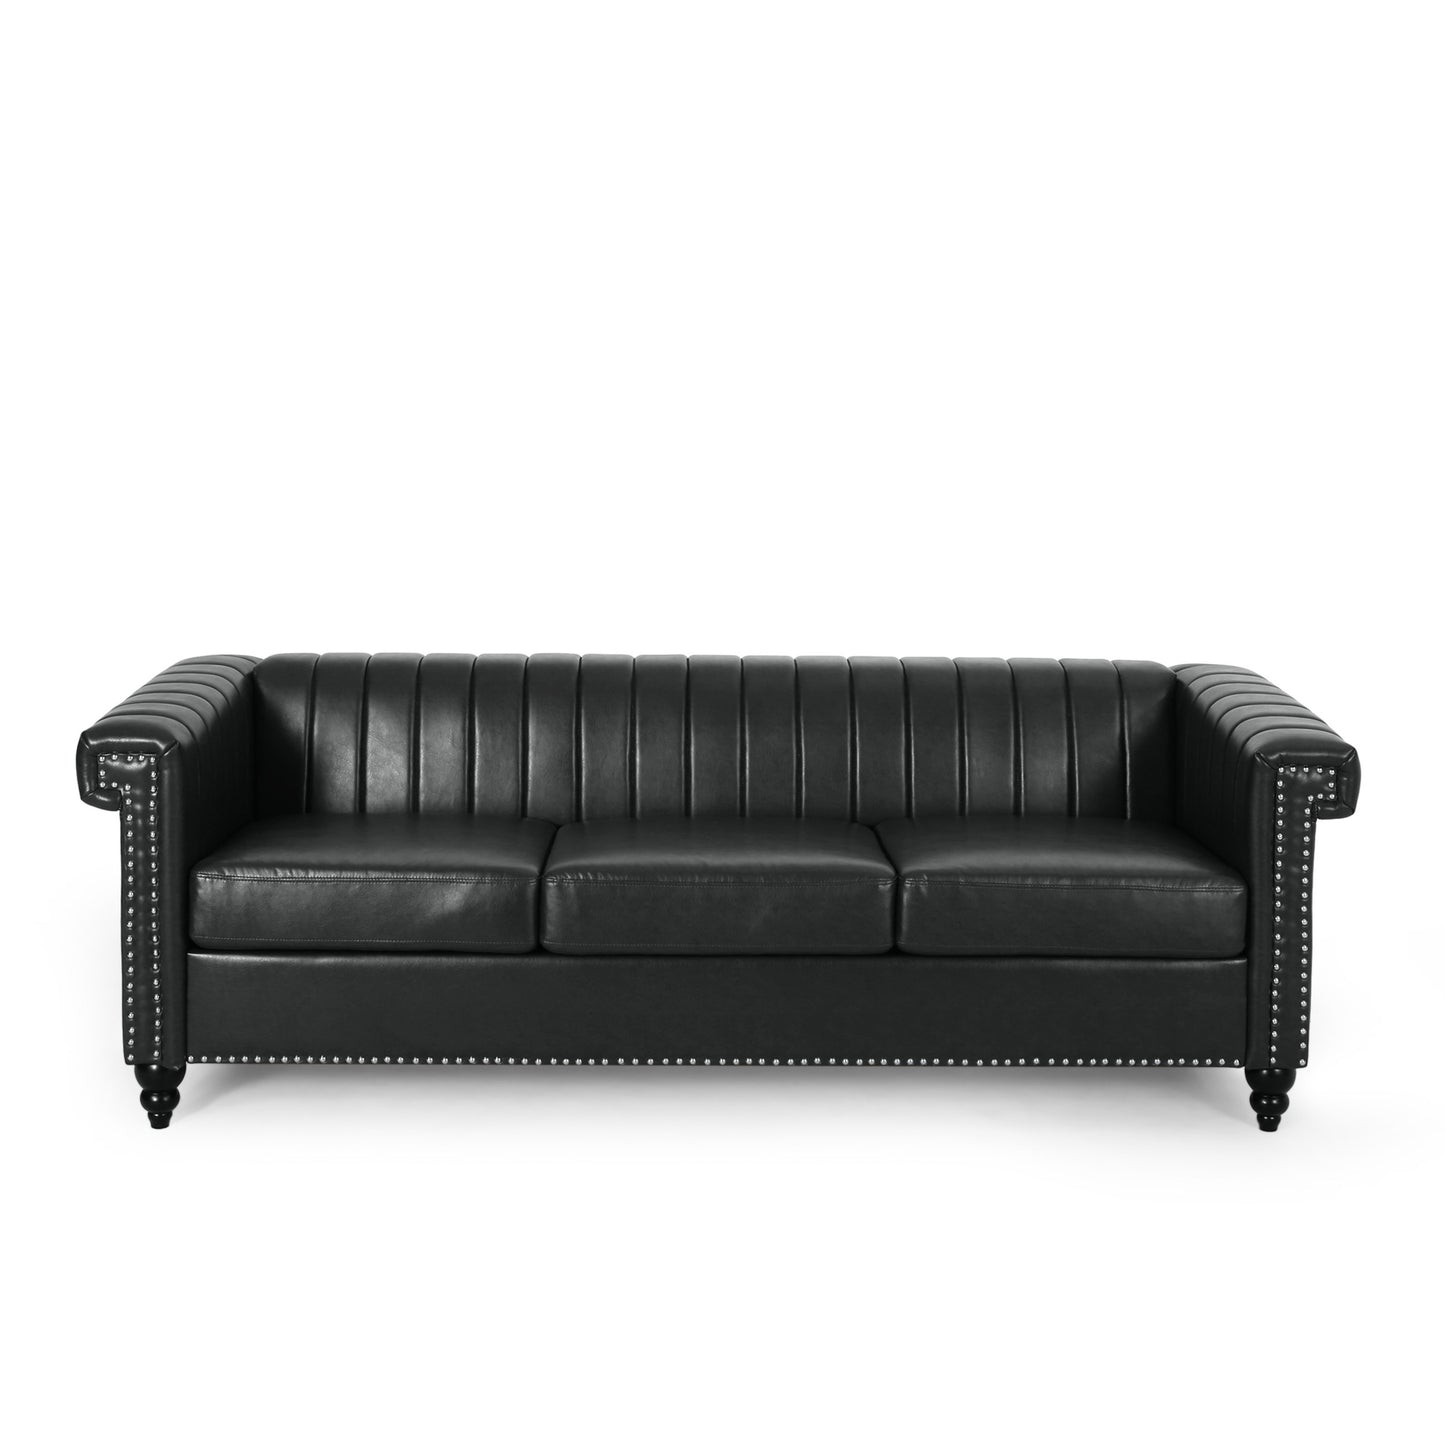 Donley Contemporary Channel Stitch 3 Seater Sofa with Nailhead Trim